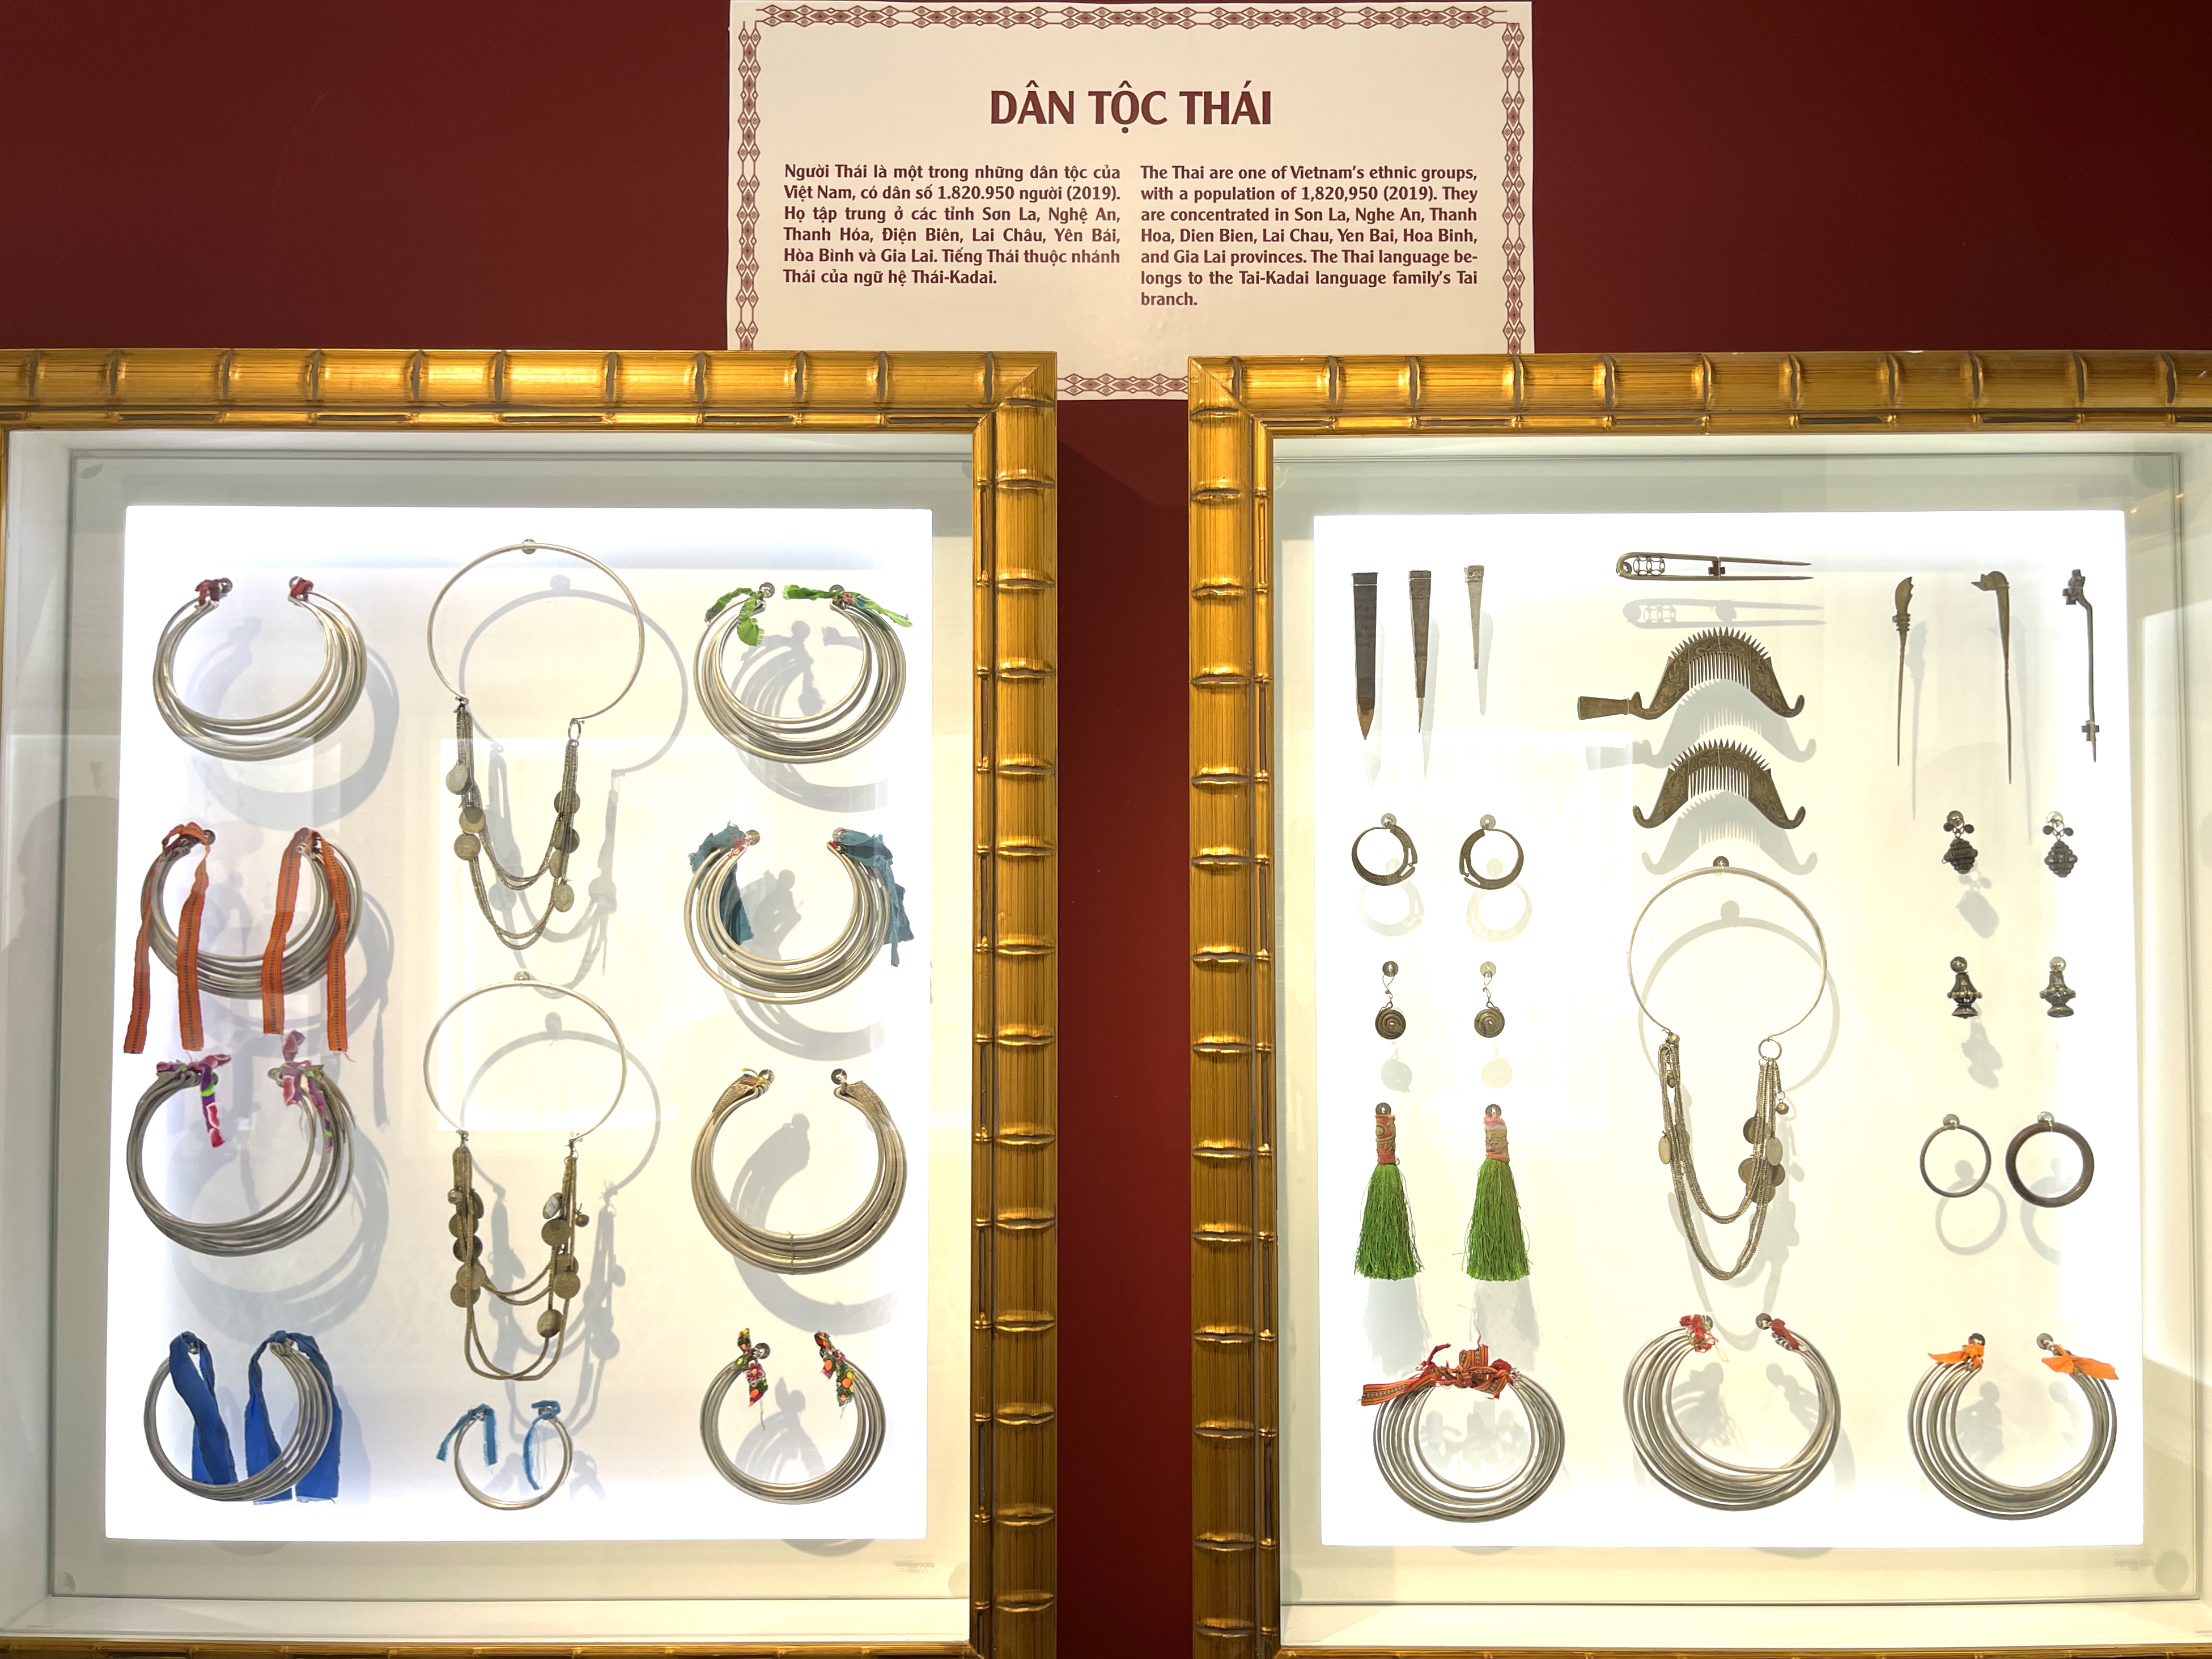 Jewelries from the Vietnamese Thai ethnic group are displayed at the Vietnam's 54 Ethnic Groups Jewelry Museum in District 1, Ho Chi Minh City. Photo: Dong Nguyen / Tuoi Tre News